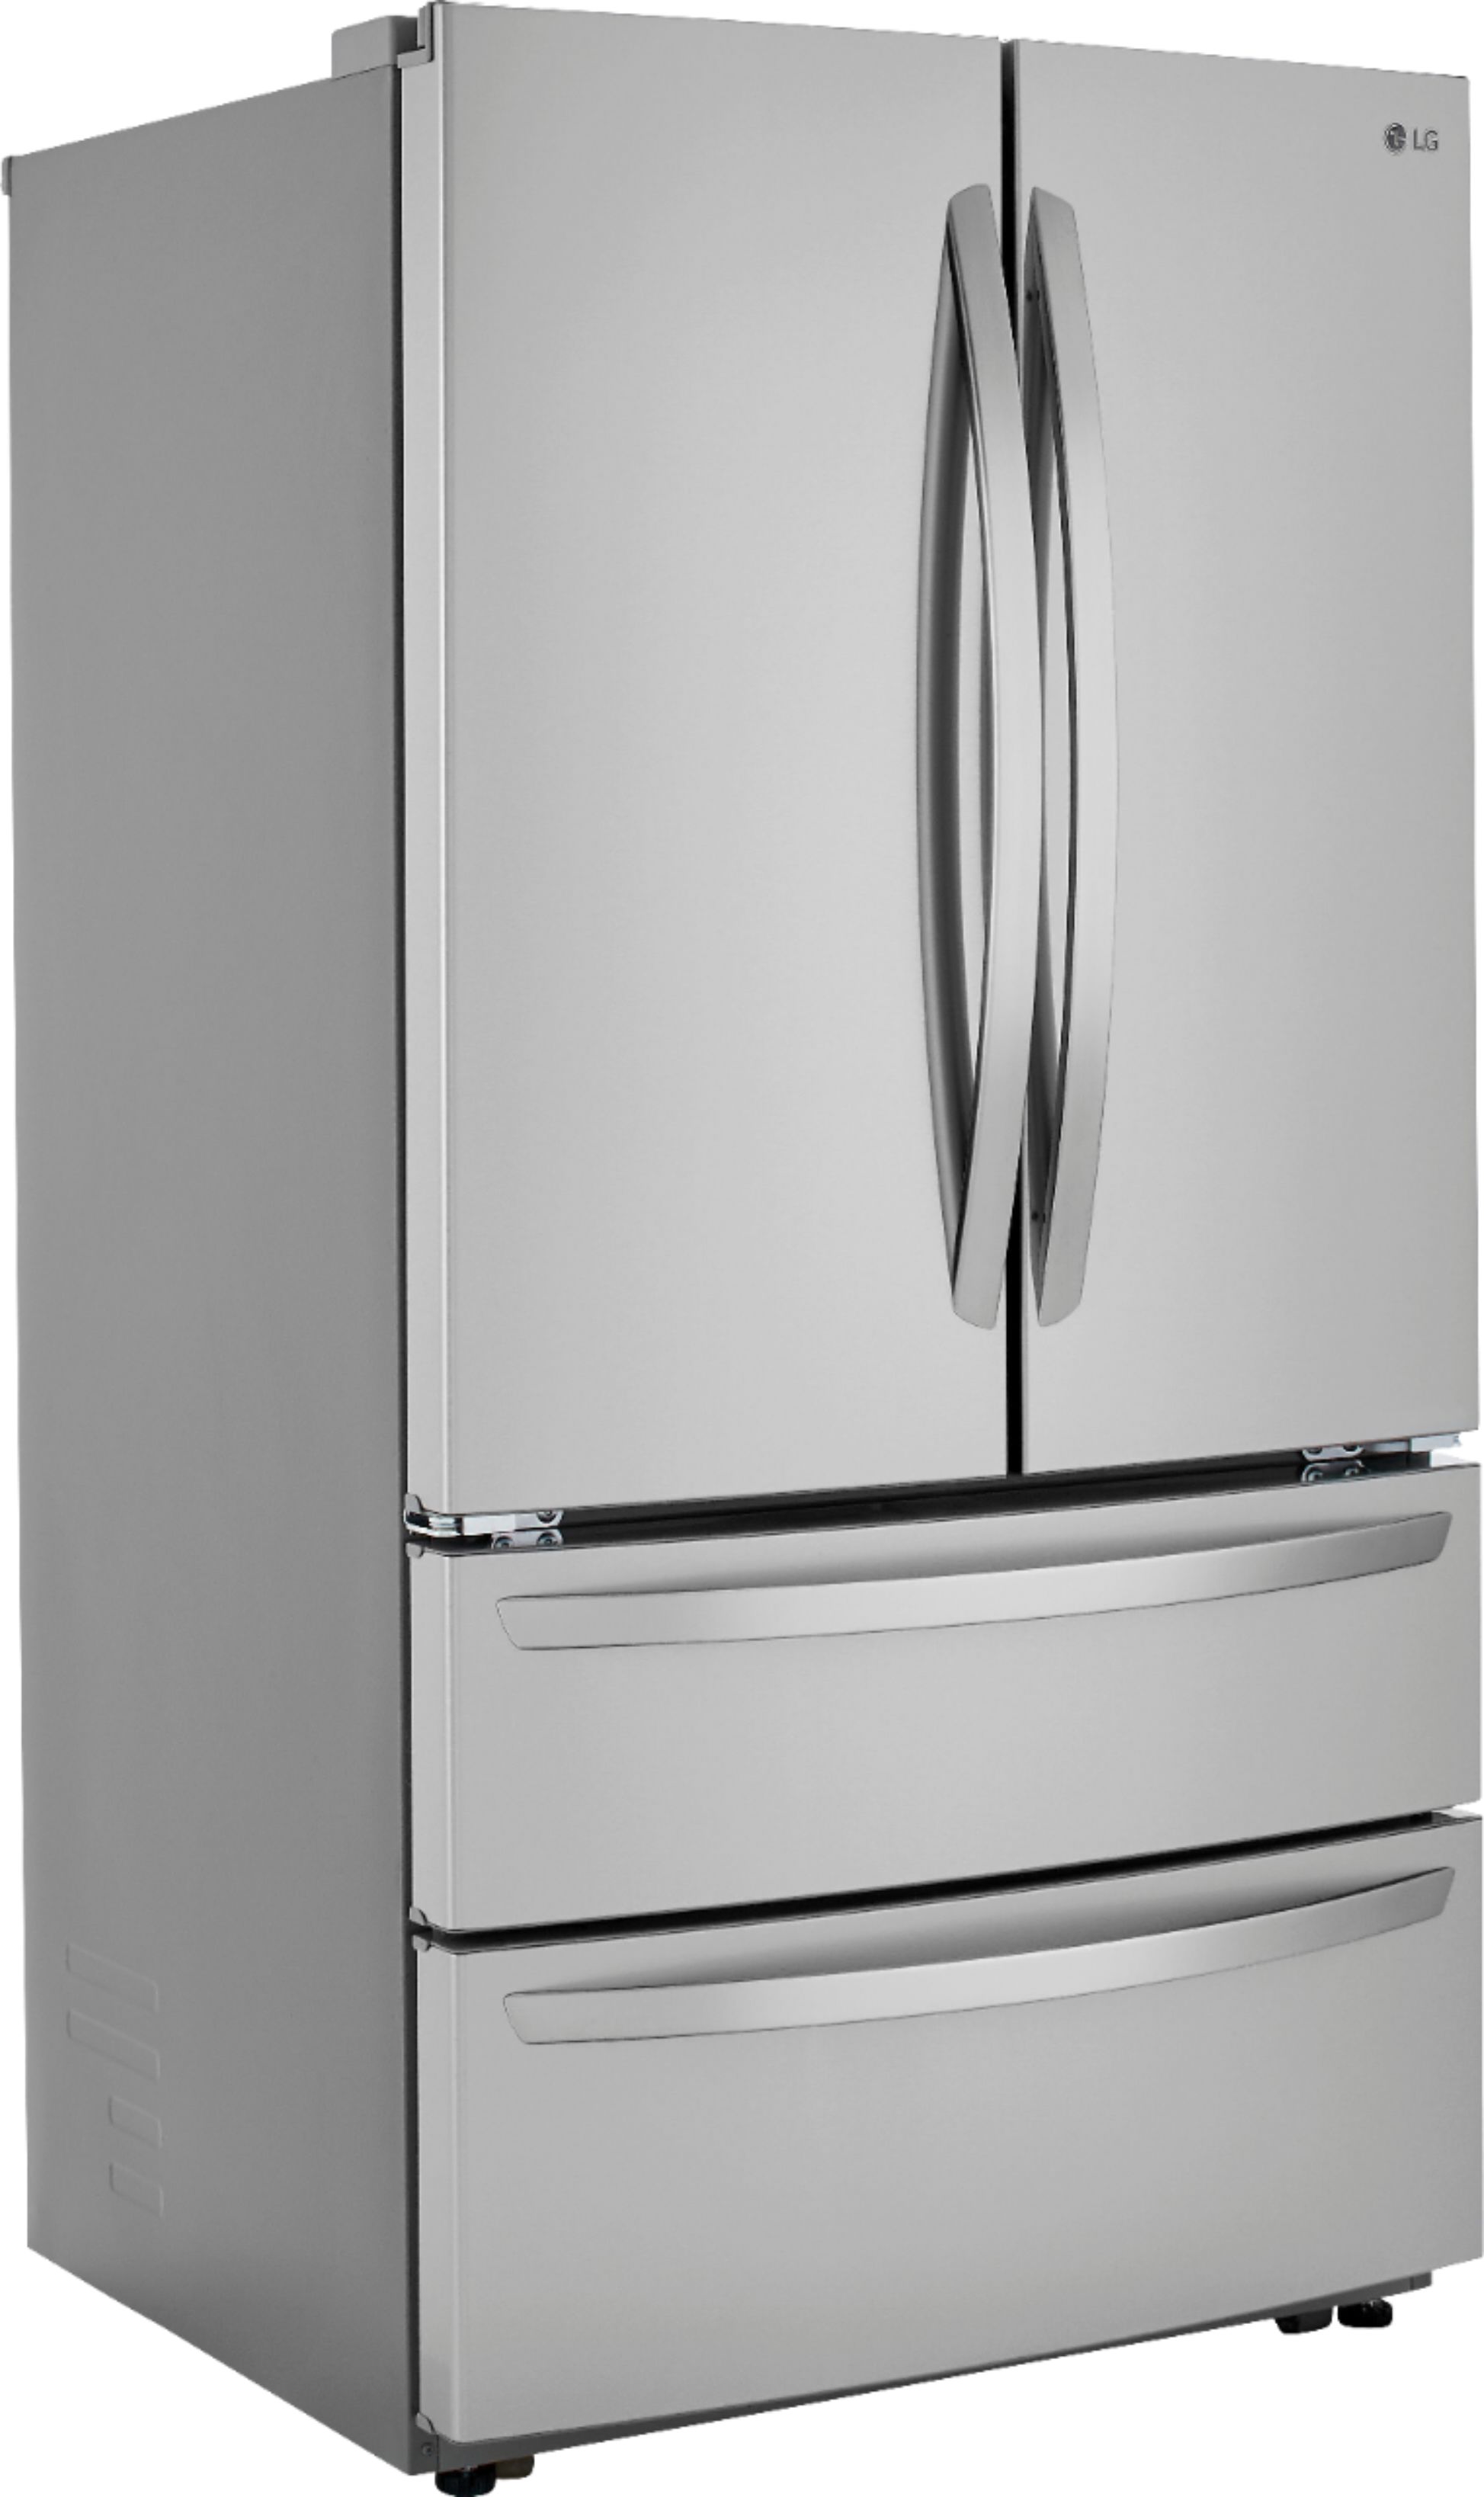 Angle View: LG - 22.7 Cu. Ft. 4-Door French Door Counter-Depth Refrigerator with Double Freezer and Internal Water Dispenser - Stainless steel